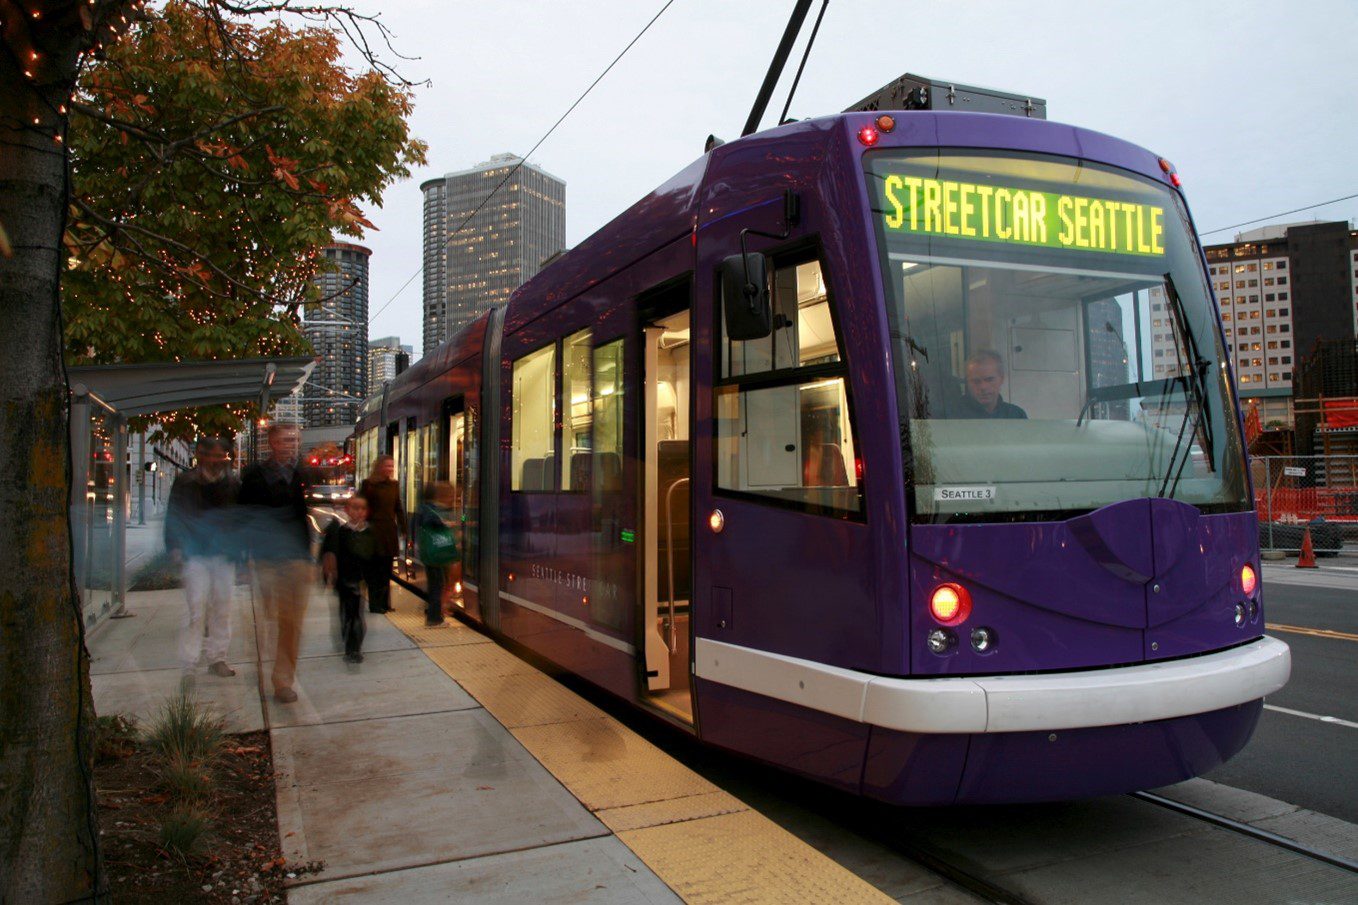 Image of a purple streetcar at a stop with people walking nearby.